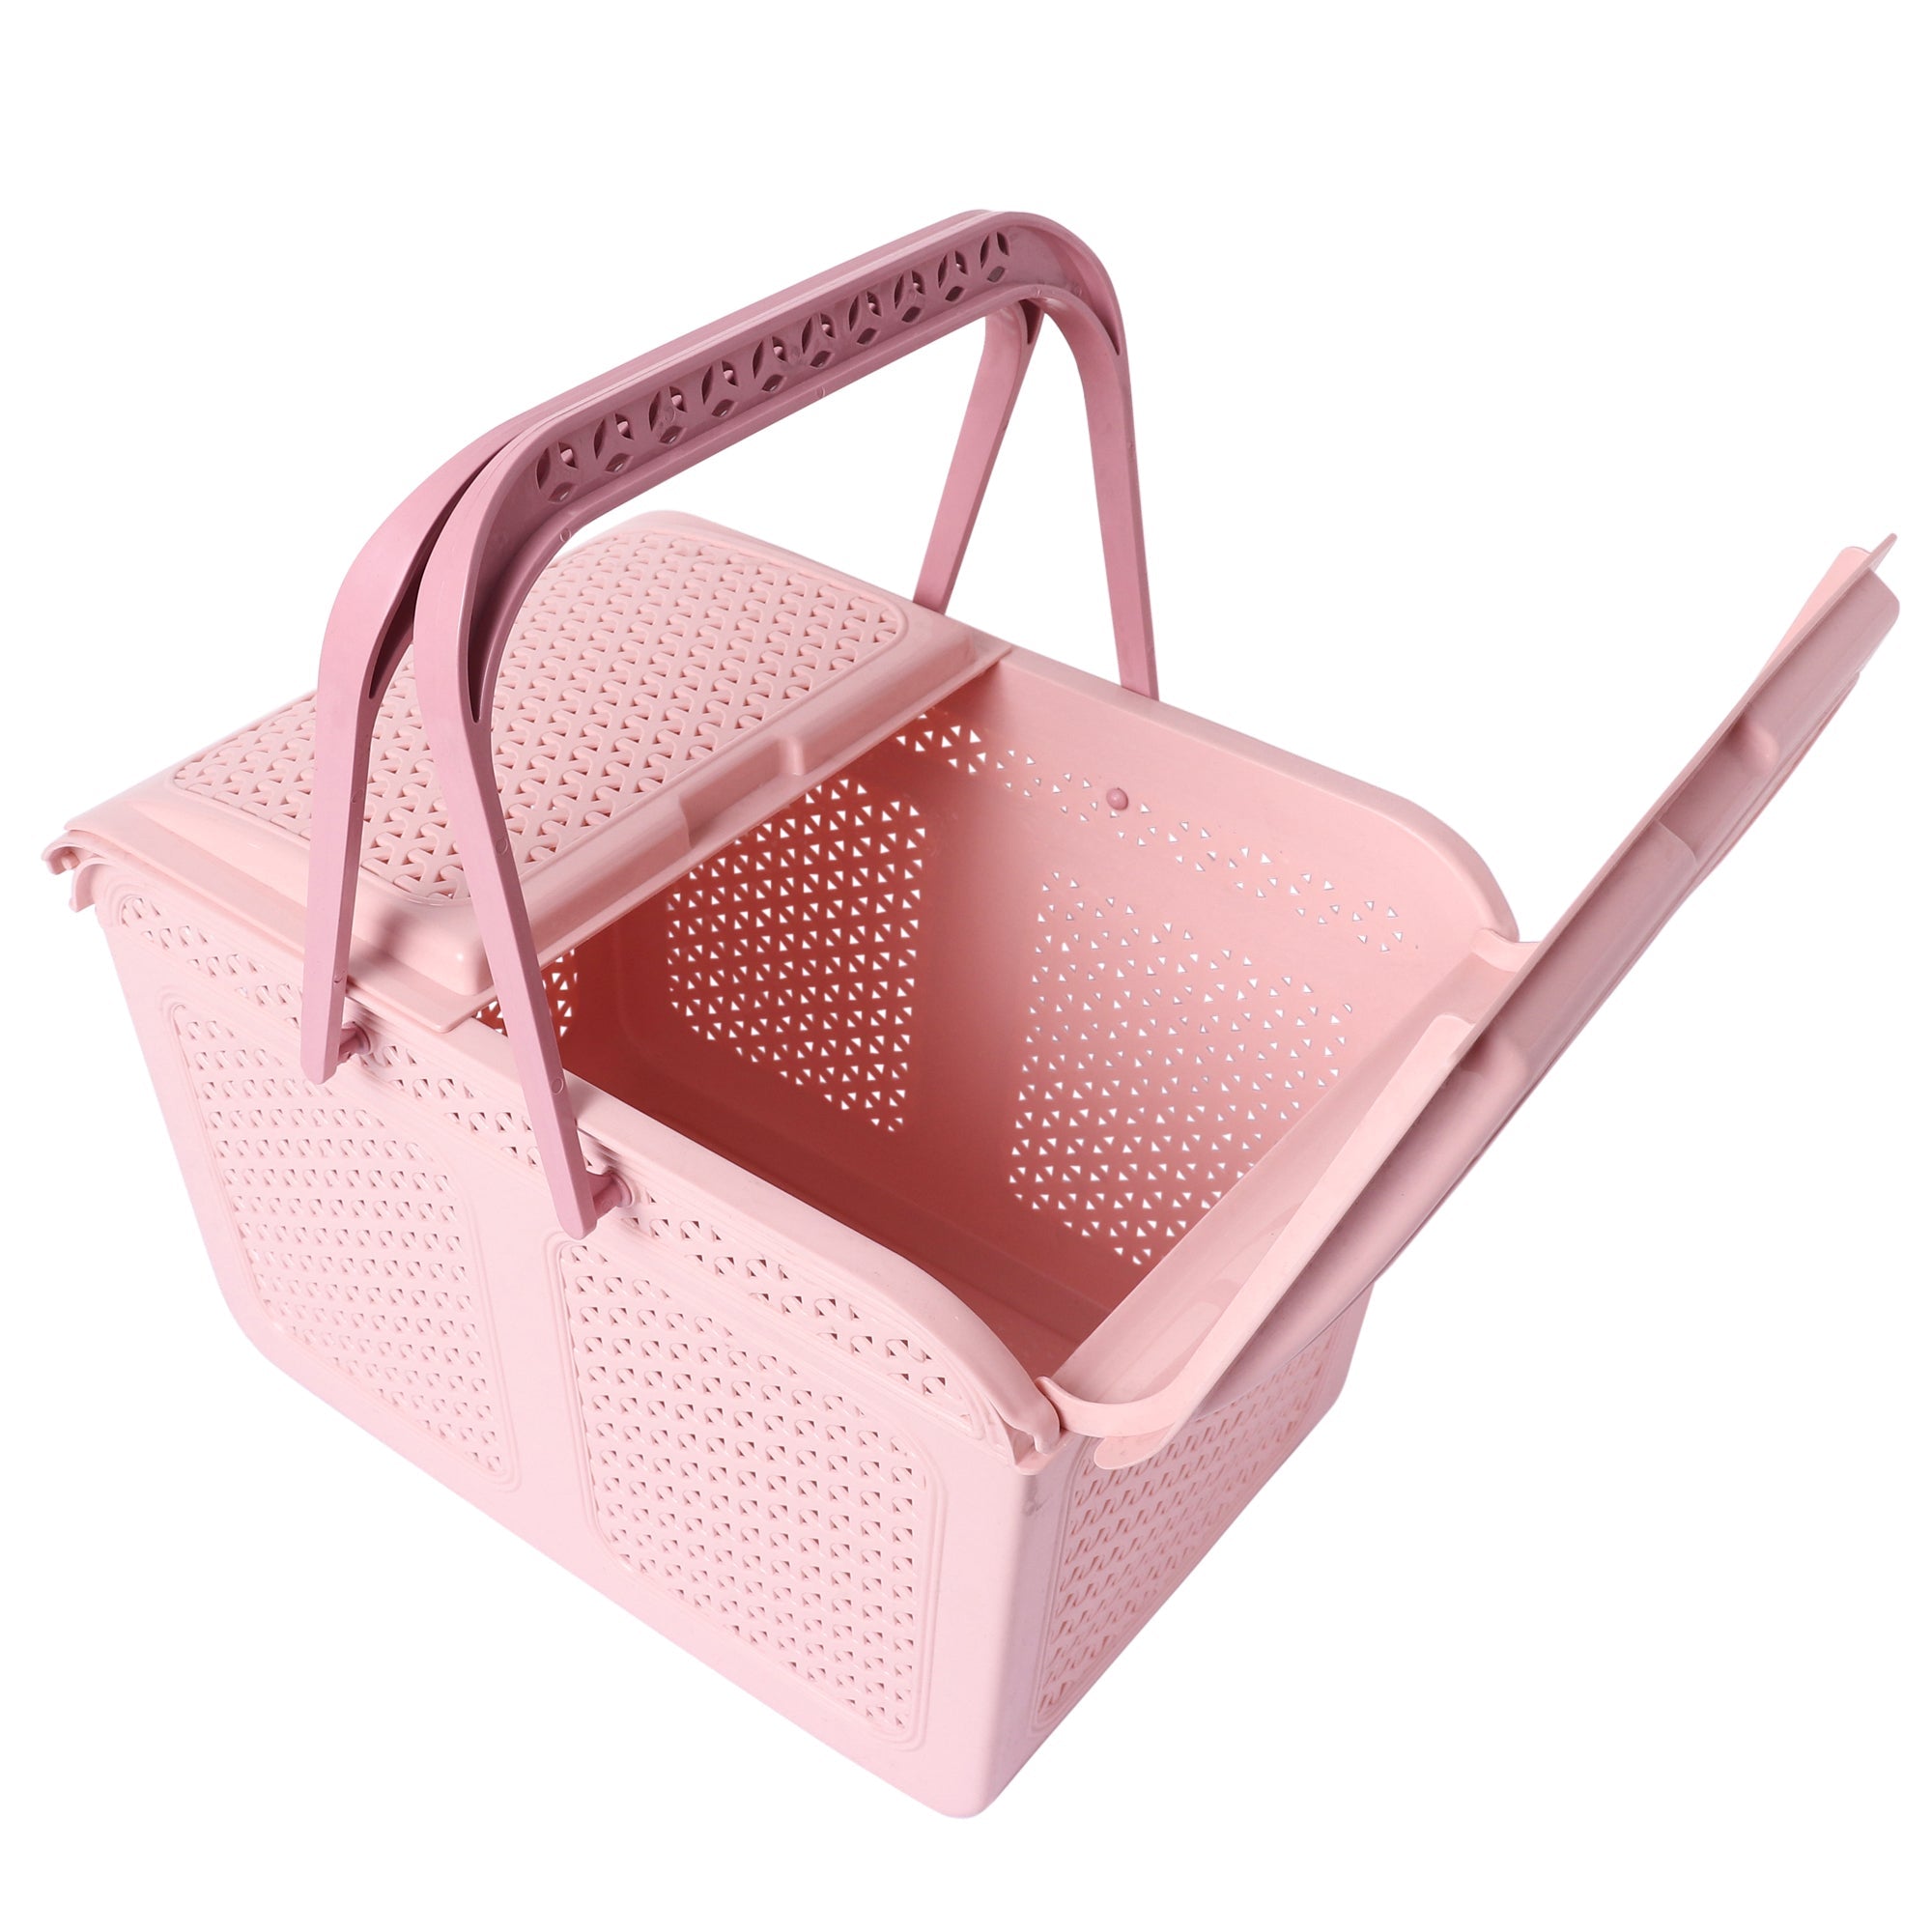 Plastic Lunch Basket with Lid for Office, Home and Picnic Use Pink